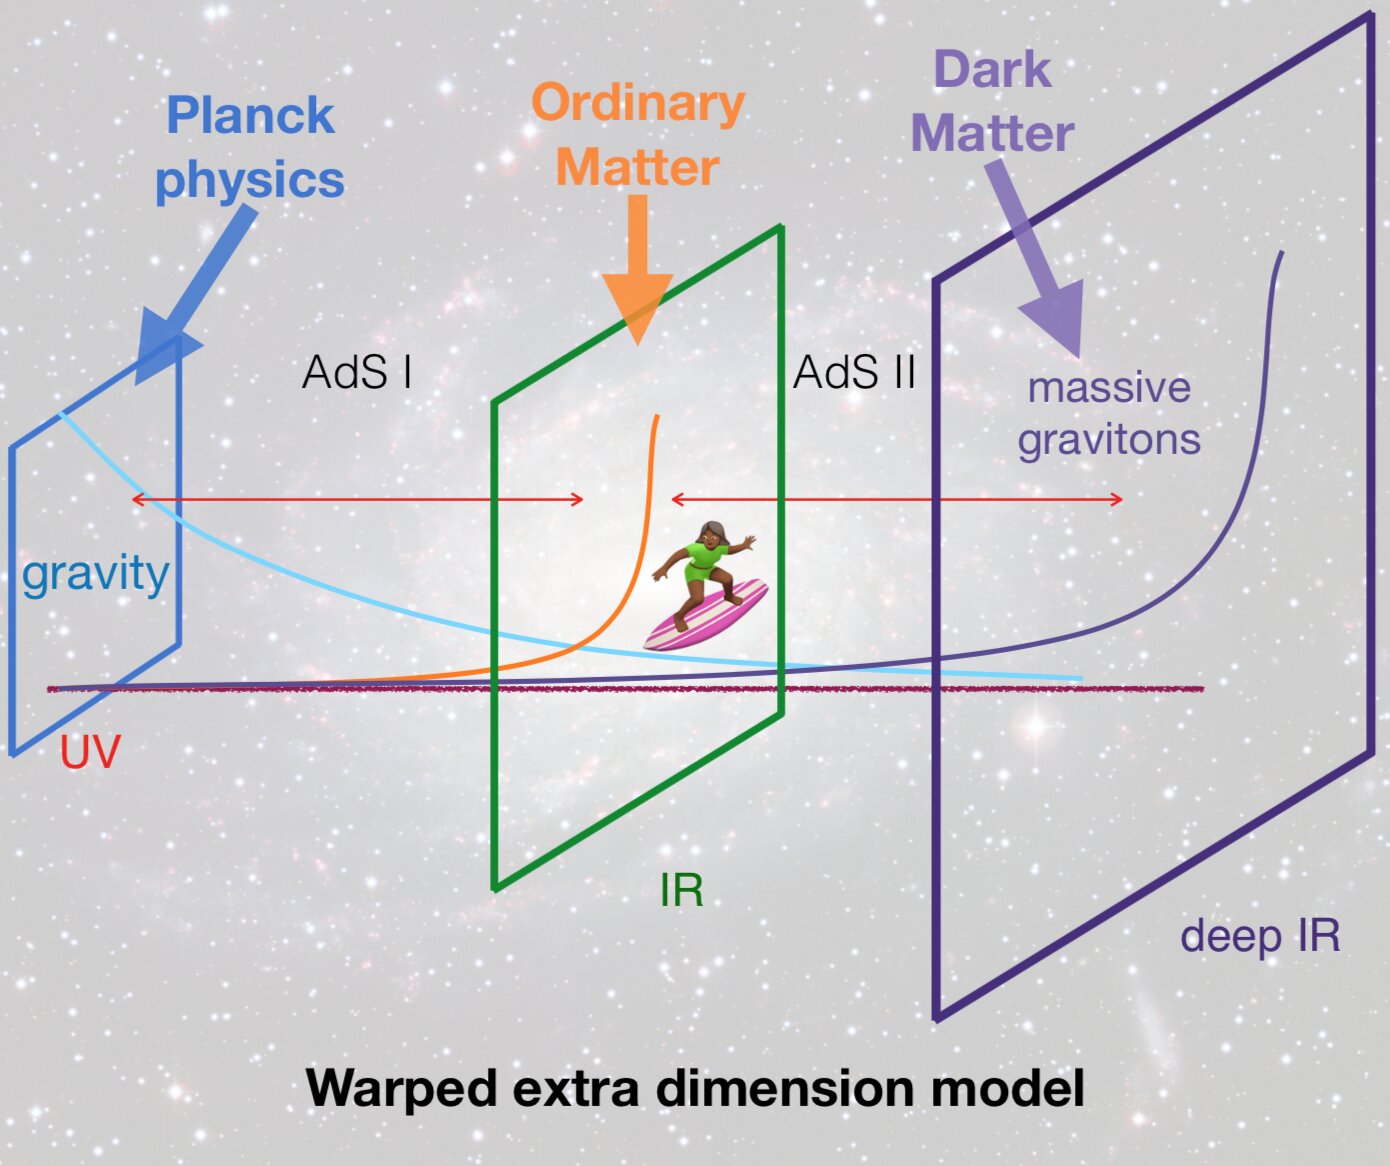 Could massive gravitons be viable dark matter candidates?